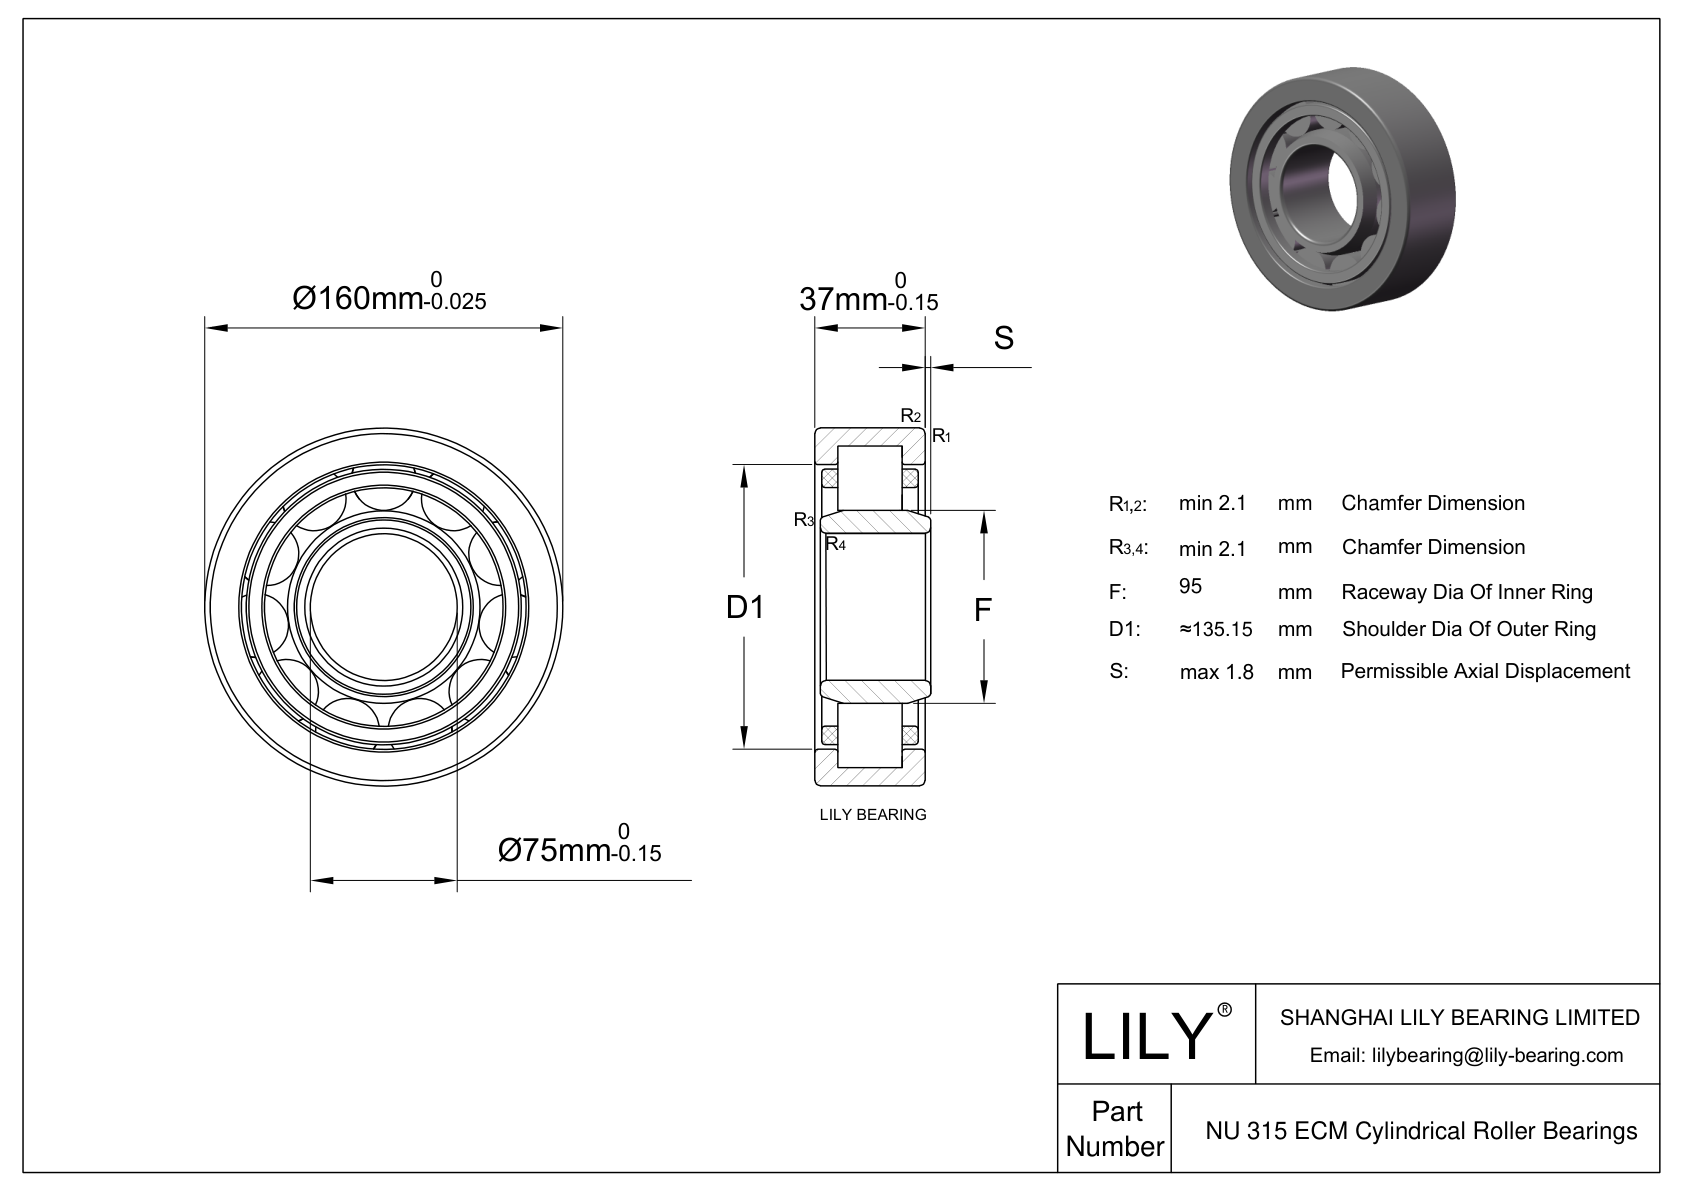 NU 315 ECM/C3VL0241 Ceramic Coated Cylindrical Roller Bearings cad drawing